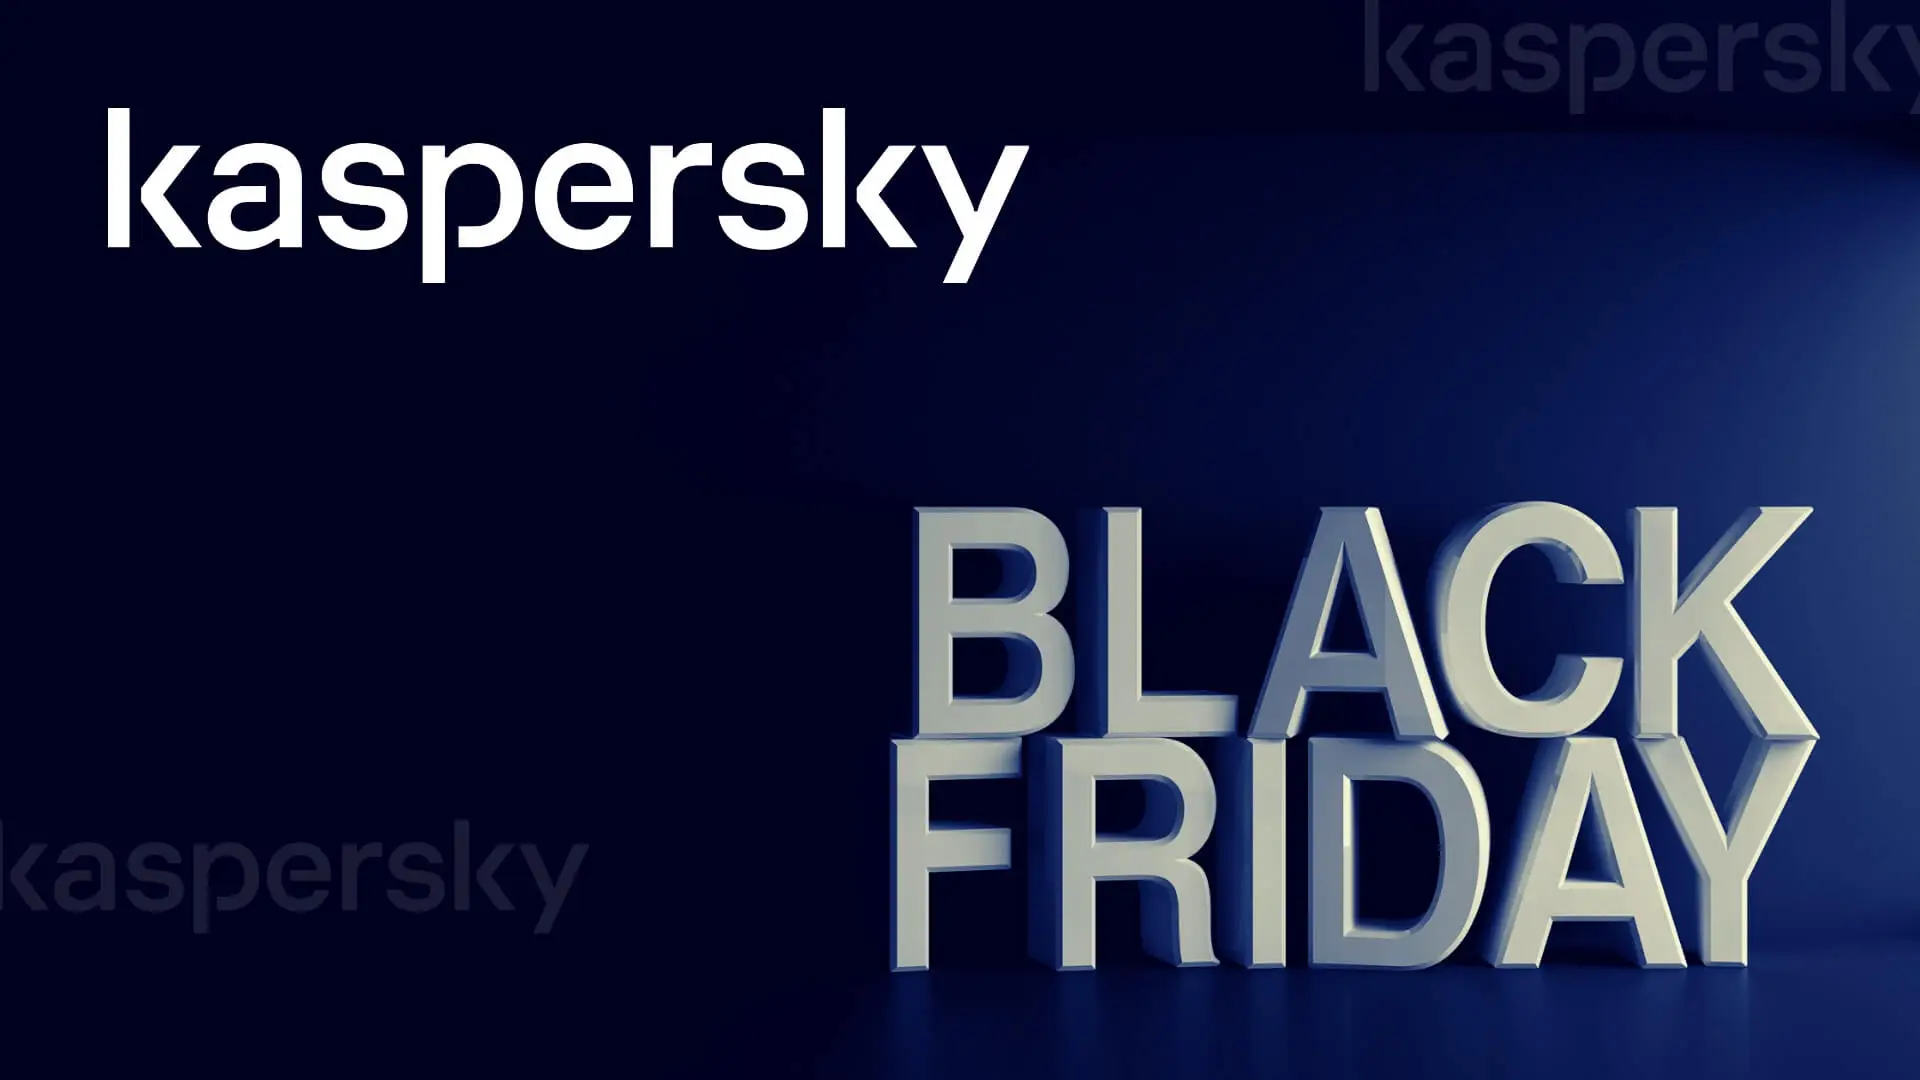 Kaspersky Introduces a Holy Grail for Black Friday